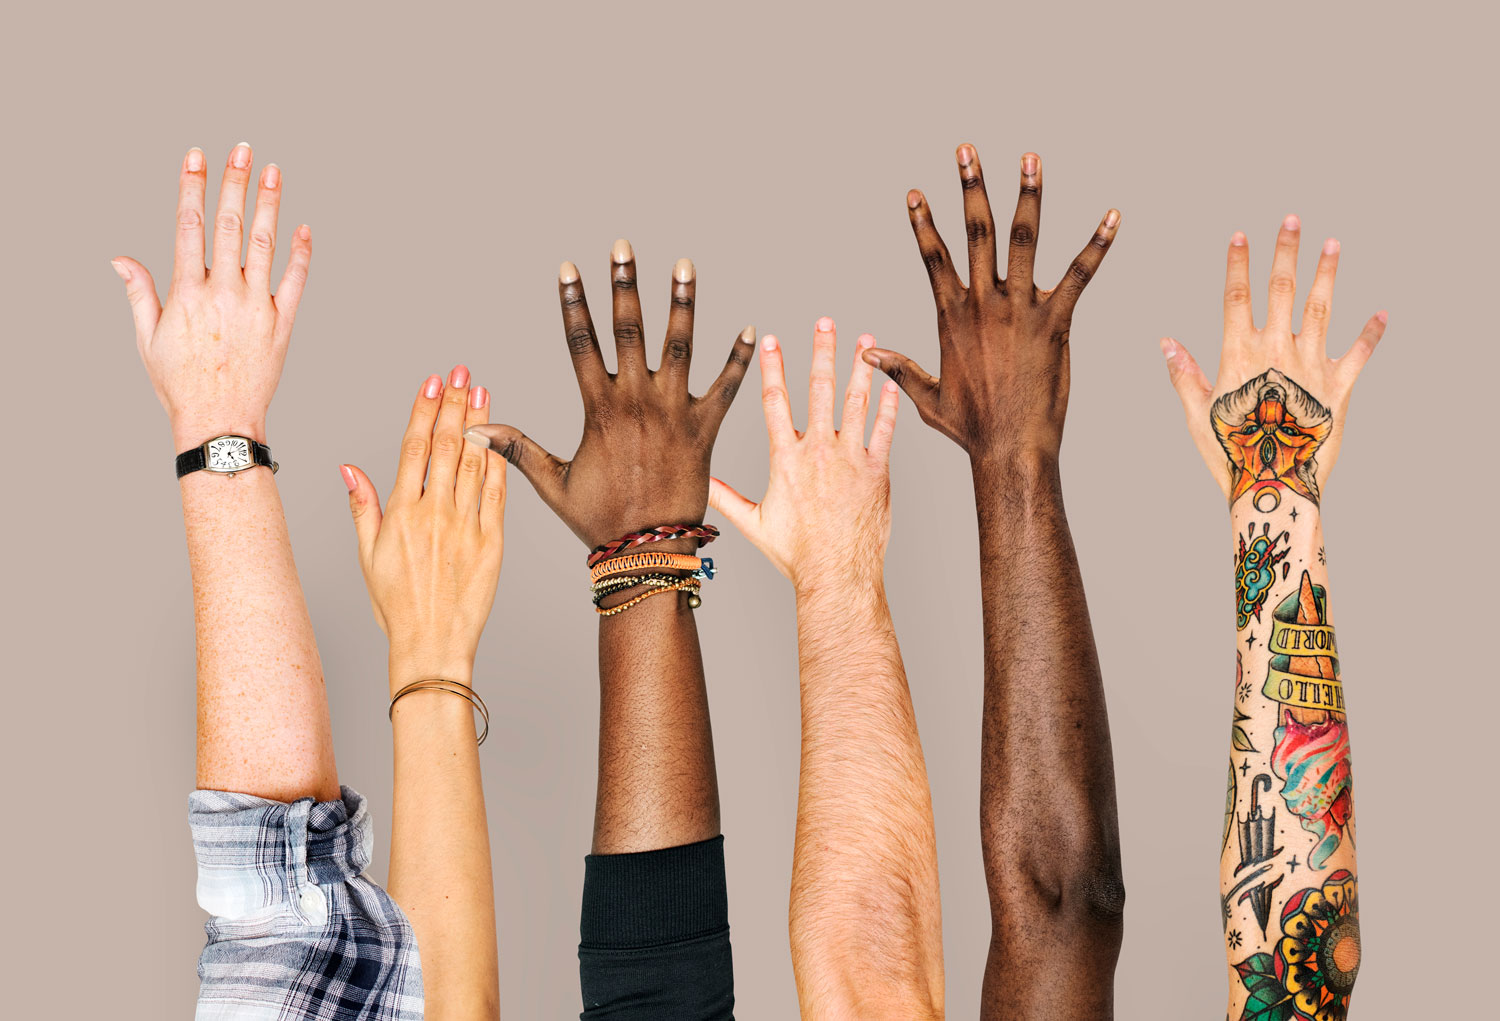 Six hands are raised in the air. They have different skin tones. One is tattooed, and some are wearing bracelets.